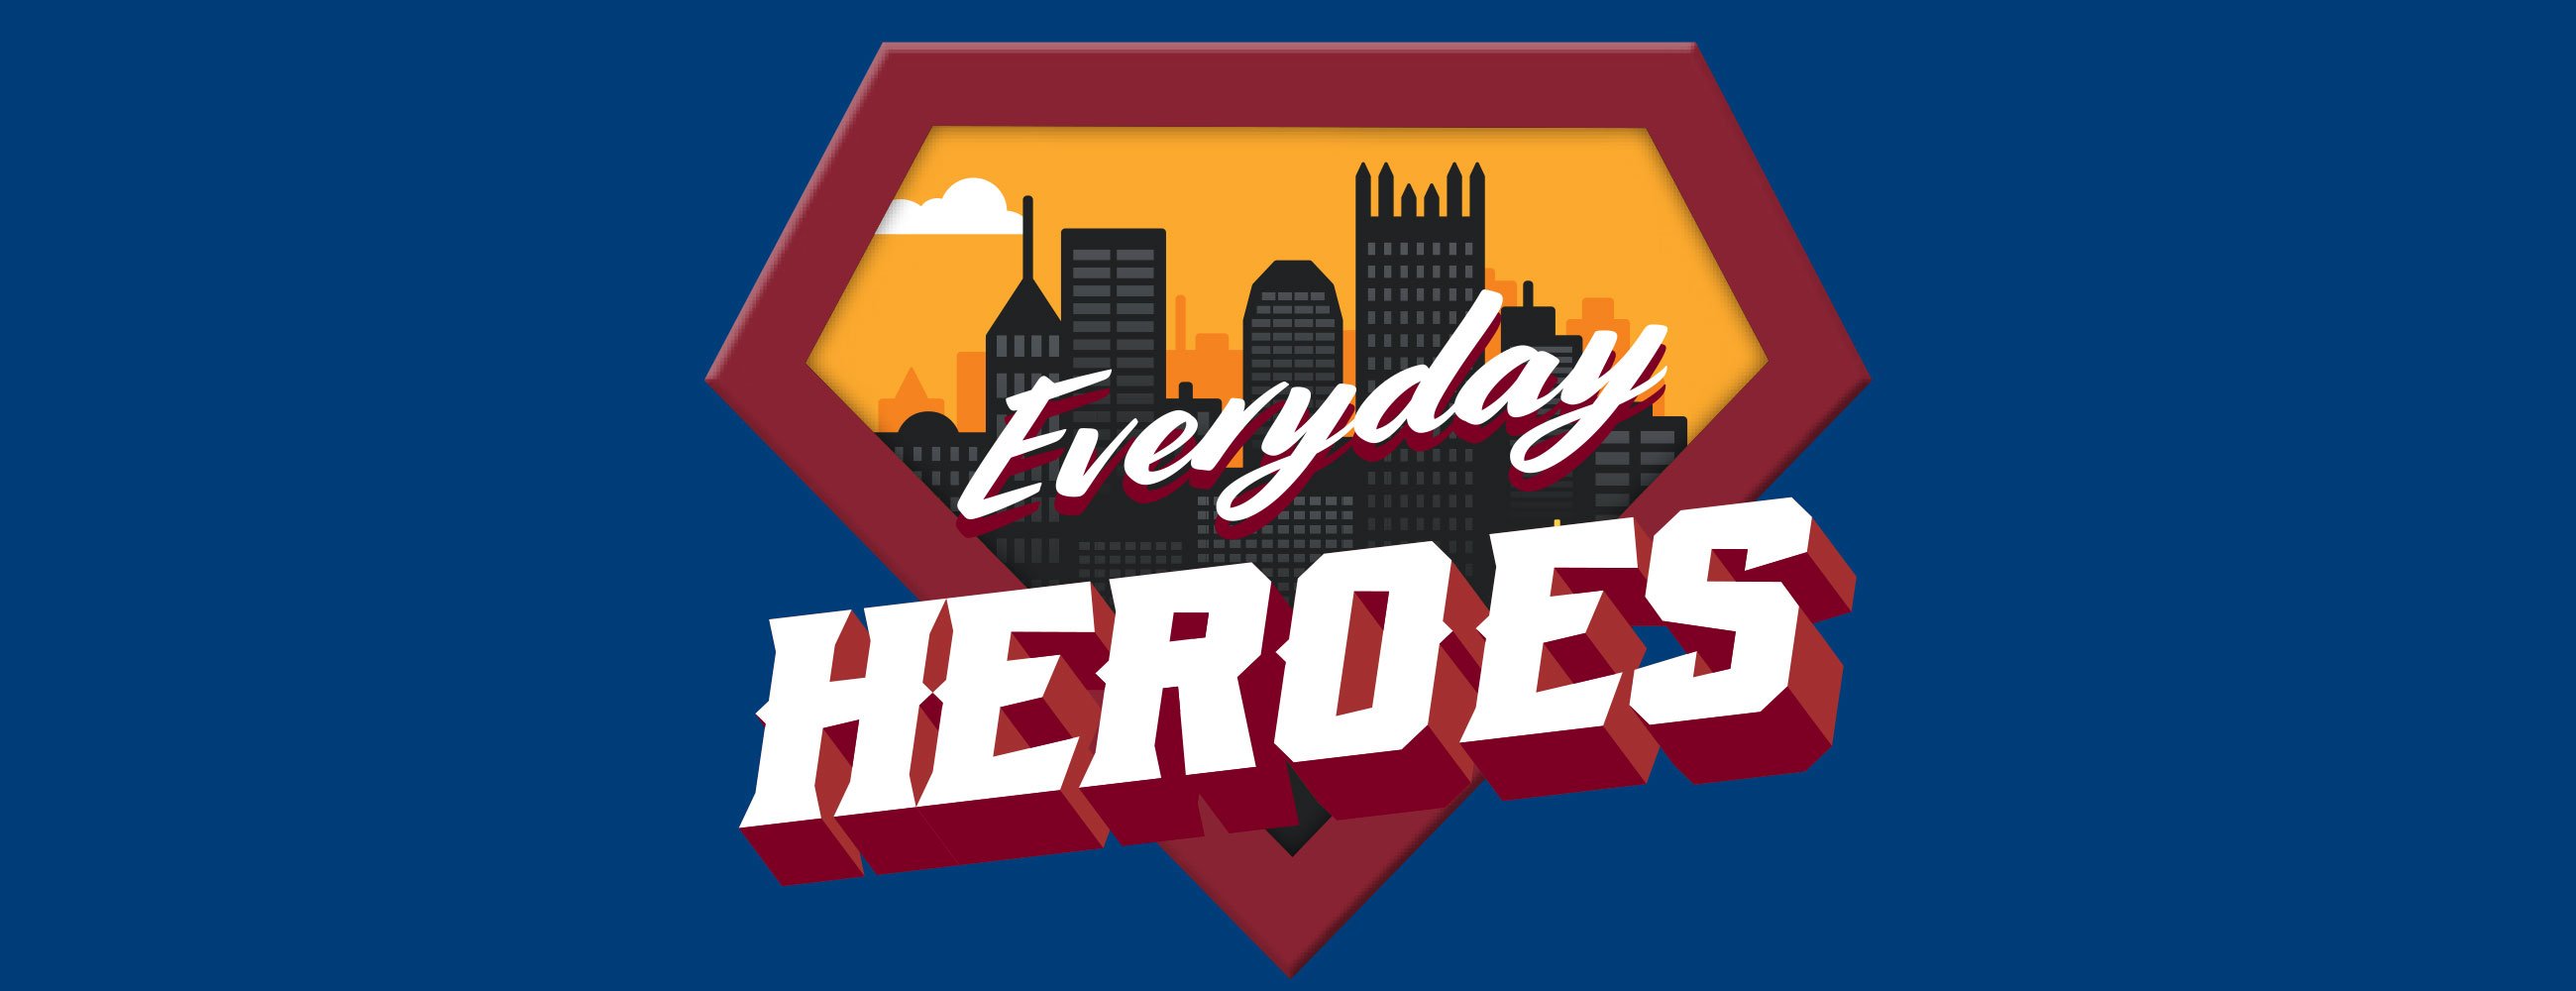 Everyday Heroes - Pittsburgh, Official Ticket Source, Heinz Hall, Sat,  Nov 5, 2022, 11:15am